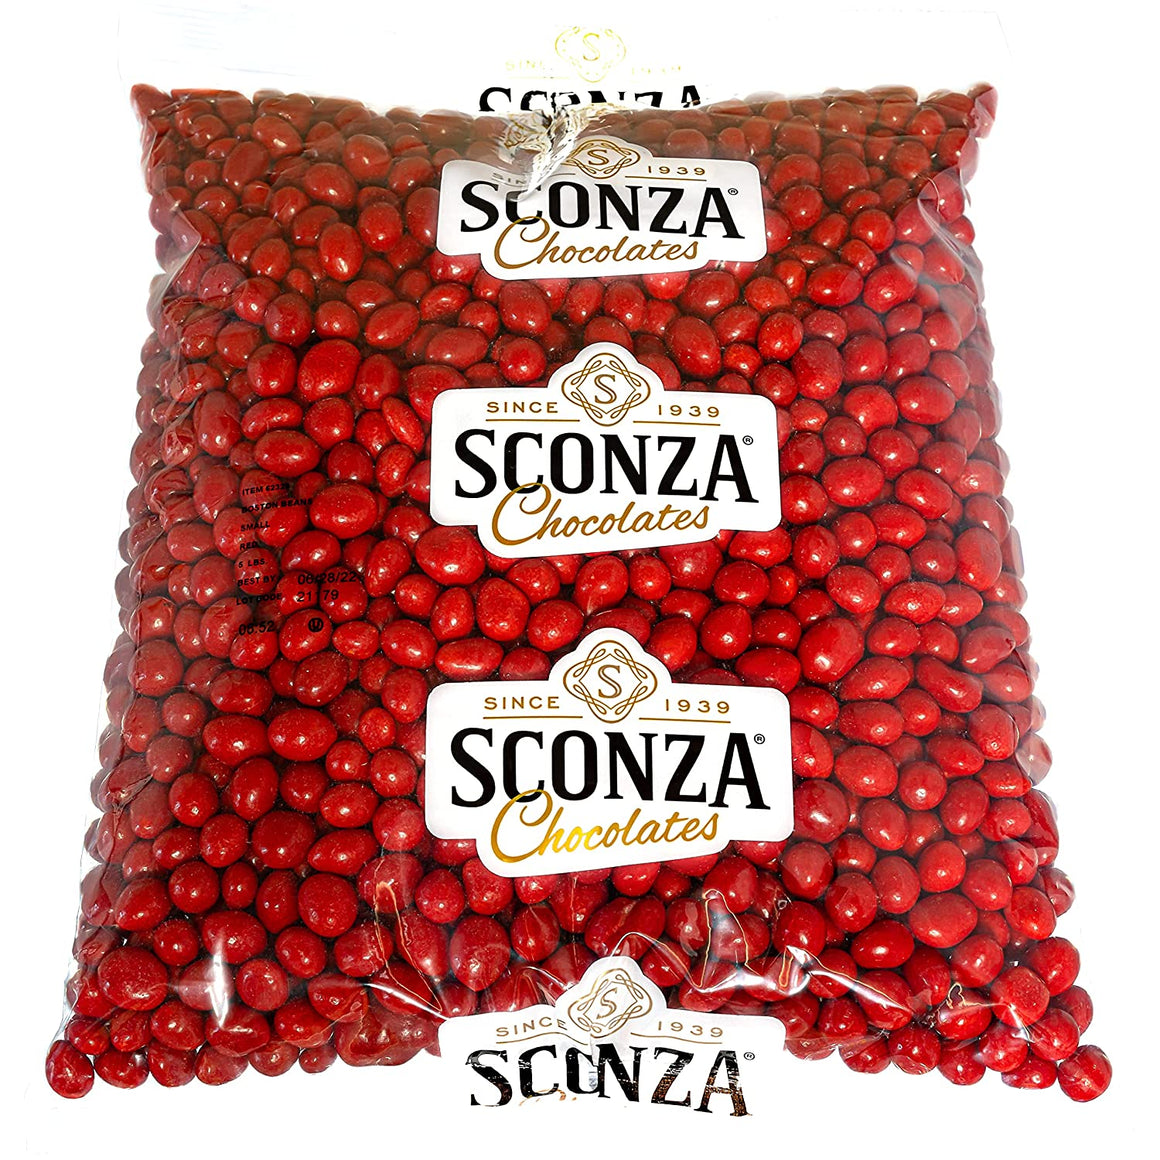 For fresh candy and great service, visit www.allcitycandy.com - Sconza Boston Baked Bean Bulk Bags